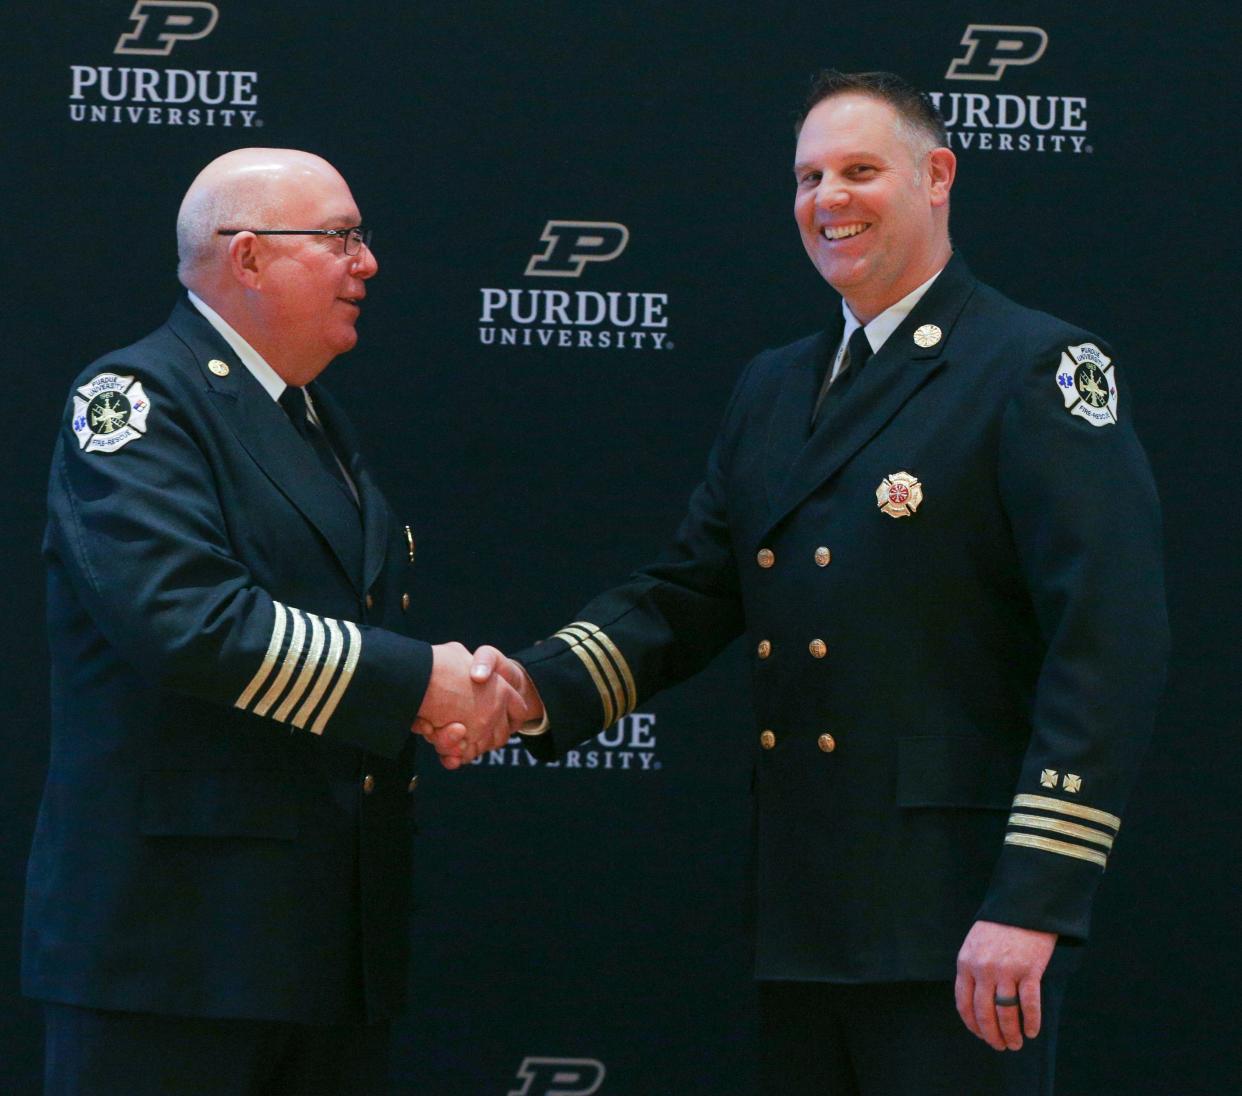 Purdue University Fire Department Retired Fire Chief, Kevin Ply, and incoming Fire Chief, Brad Anderson, pose for a photo after the changing of the guard ceremony, on Wednesday, Dec. 14, 2022, in Lafayette, Ind.